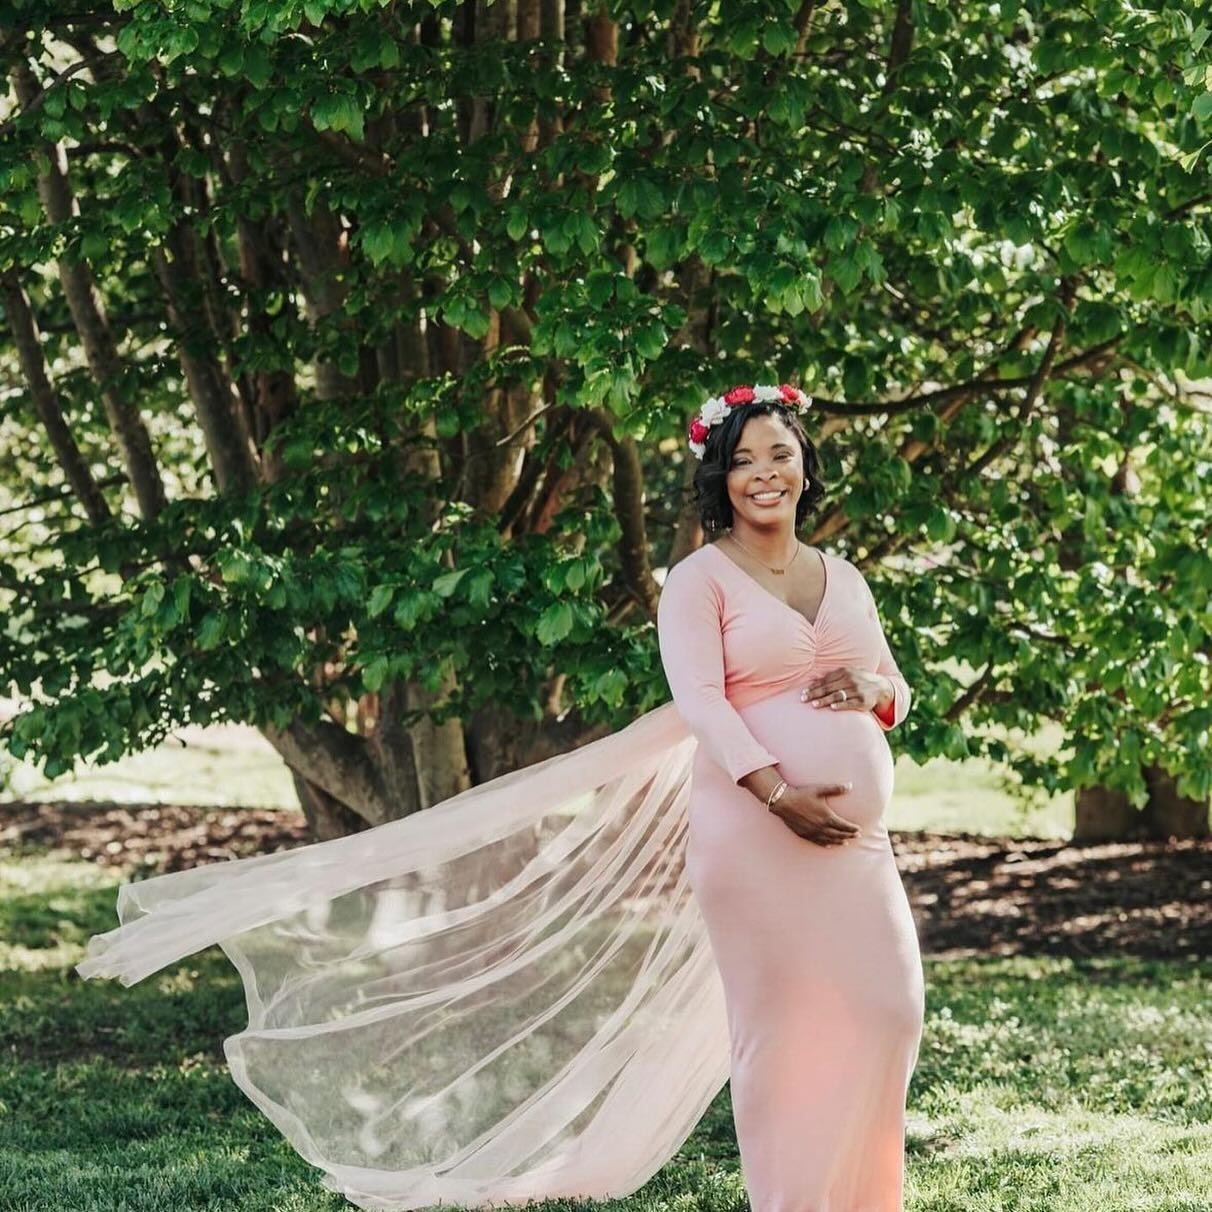 This mama is glowing &amp; gorgeous in The Grace Gown! 🌸 

Congratulations, Dar&rsquo;Neshia, on your beautiful growing family.

#maternity #maternityphotoshoot #pregnant #pregnancy #preggo #mama #mom #momlife #momtobe #pregnancyjourney #maternityfa